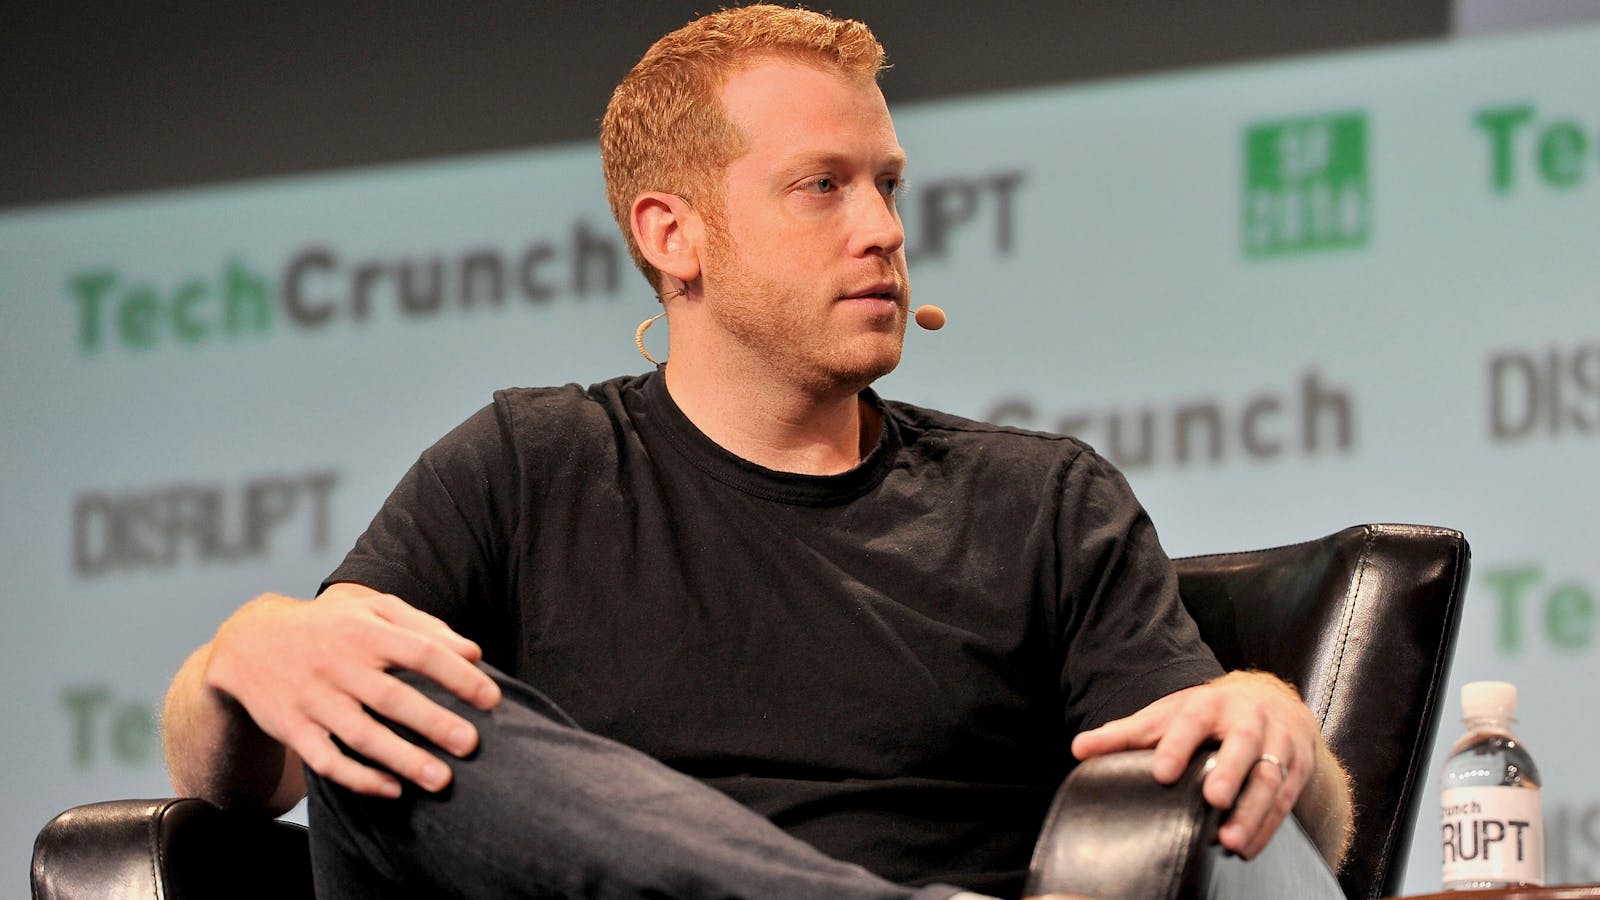 Cruise CEO Kyle Vogt. Photo by Flickr/TechCrunch.